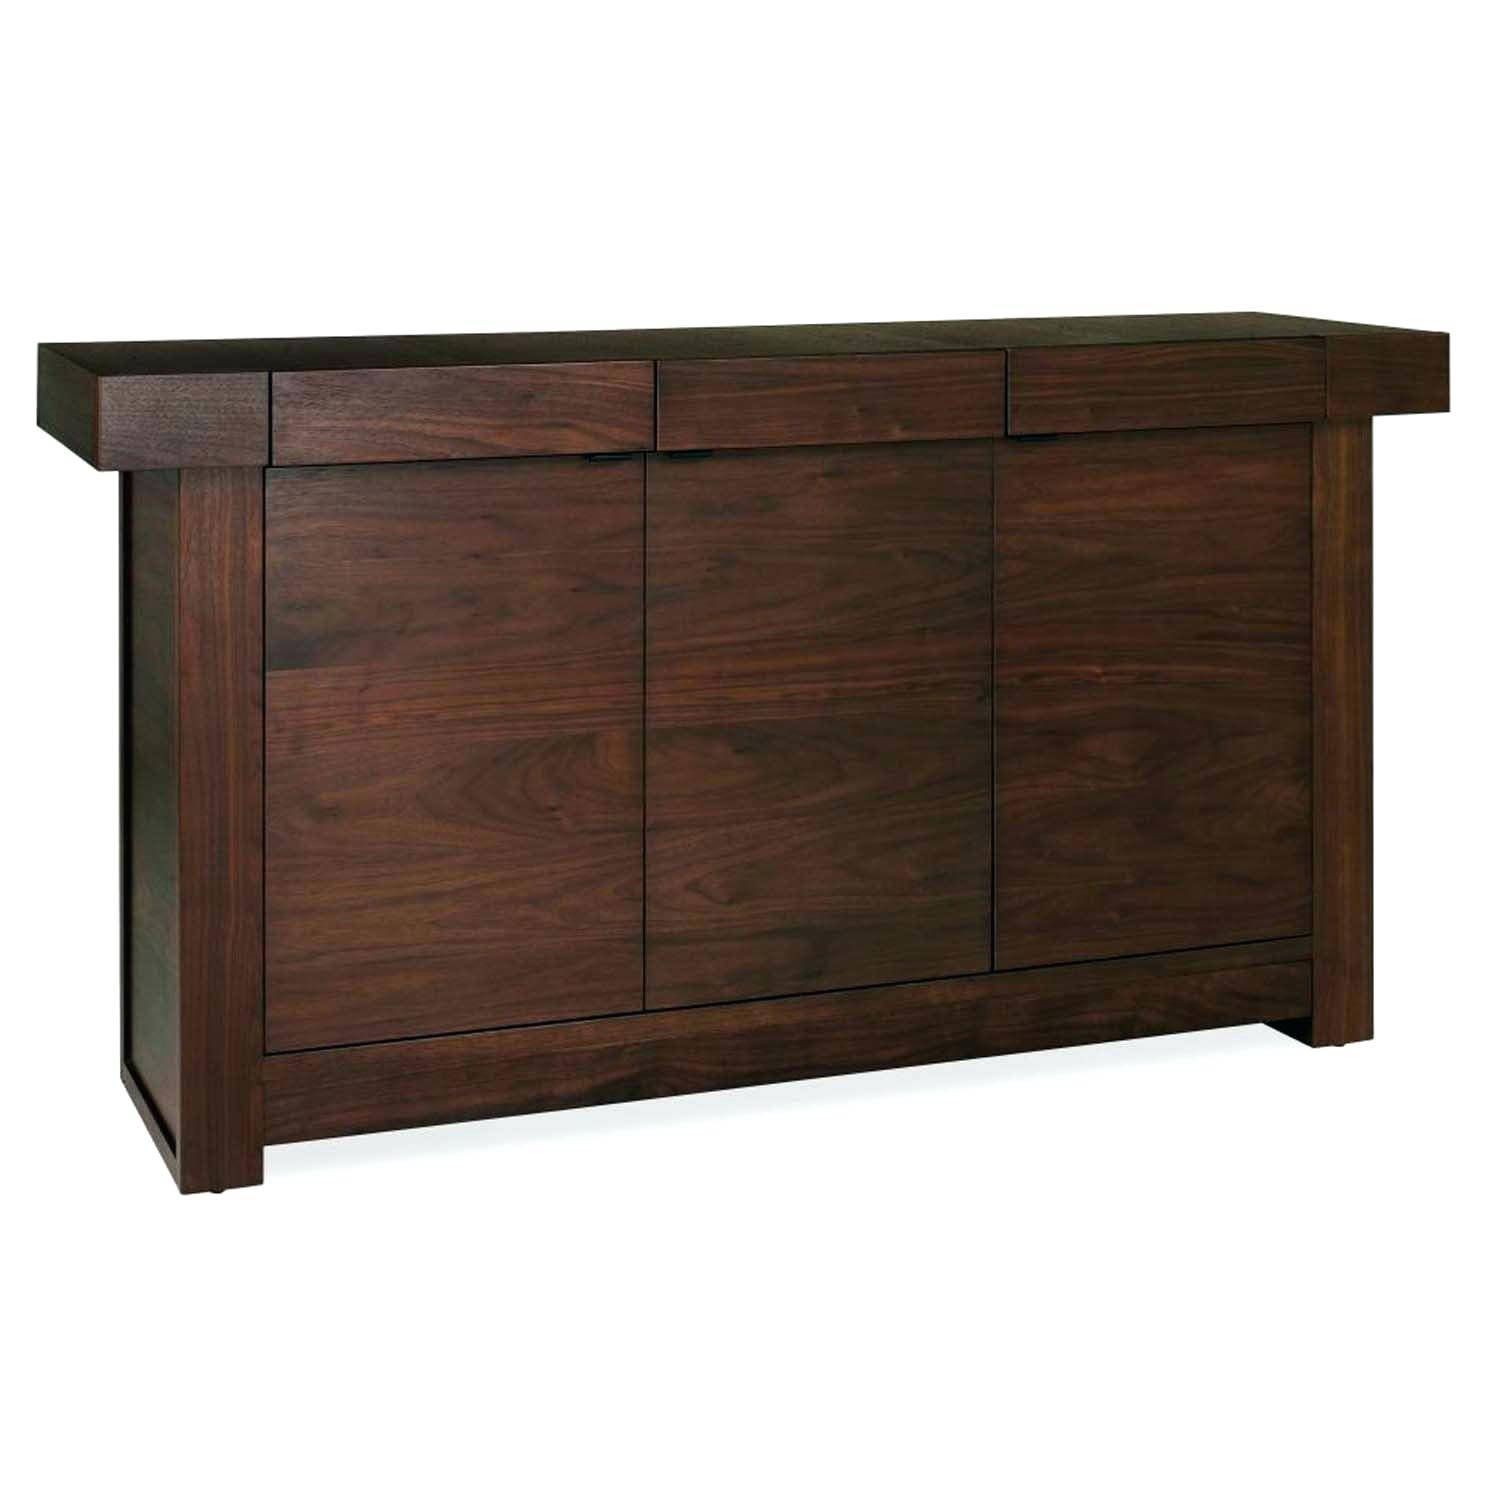 Walnut Sideboards Walnut Sideboard Sideboards Walnut Effect Pertaining To Most Recent Walnut Sideboards (View 10 of 15)